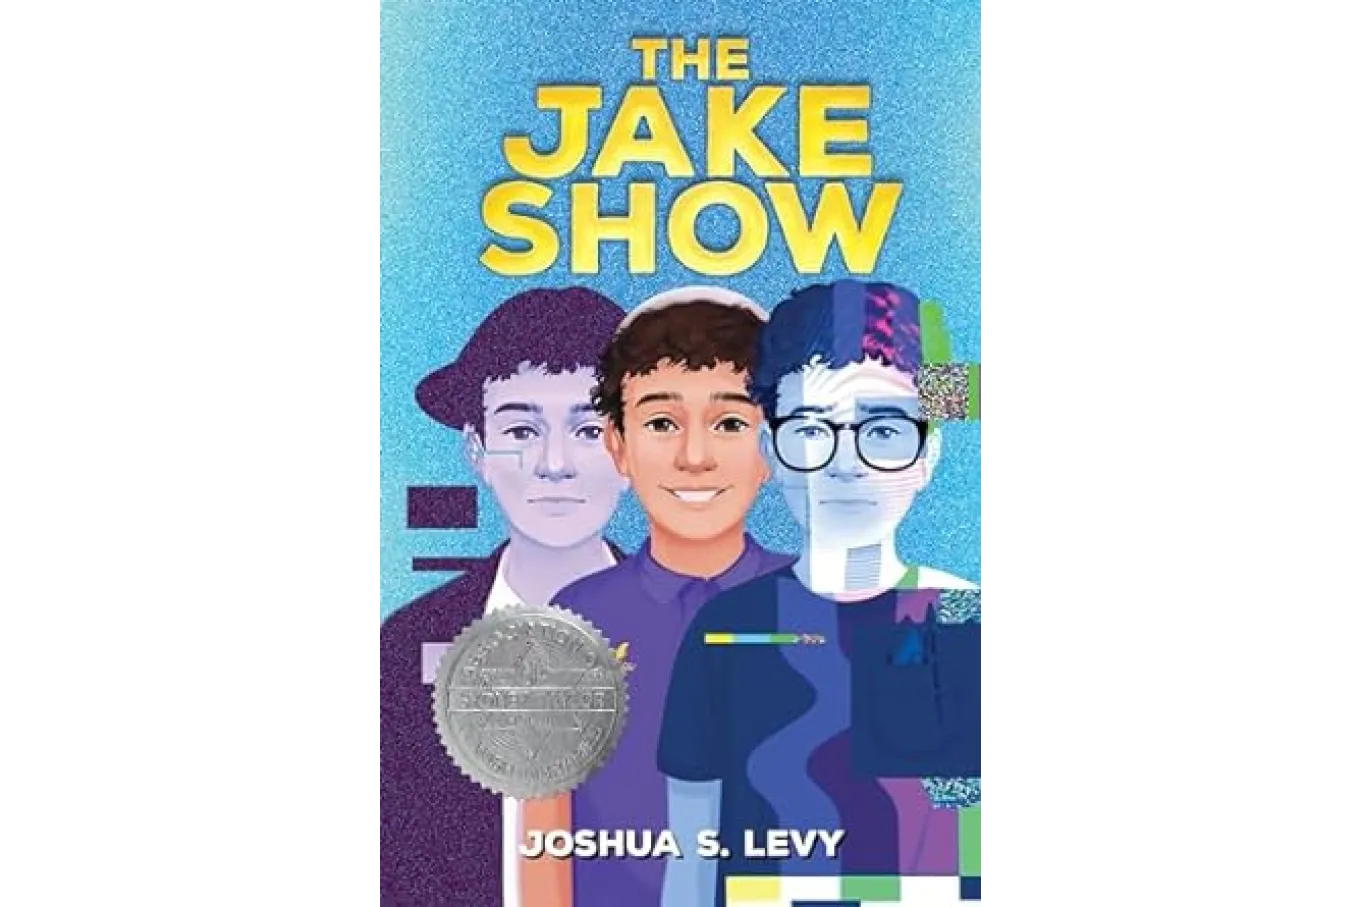 Cover of the Jake Show